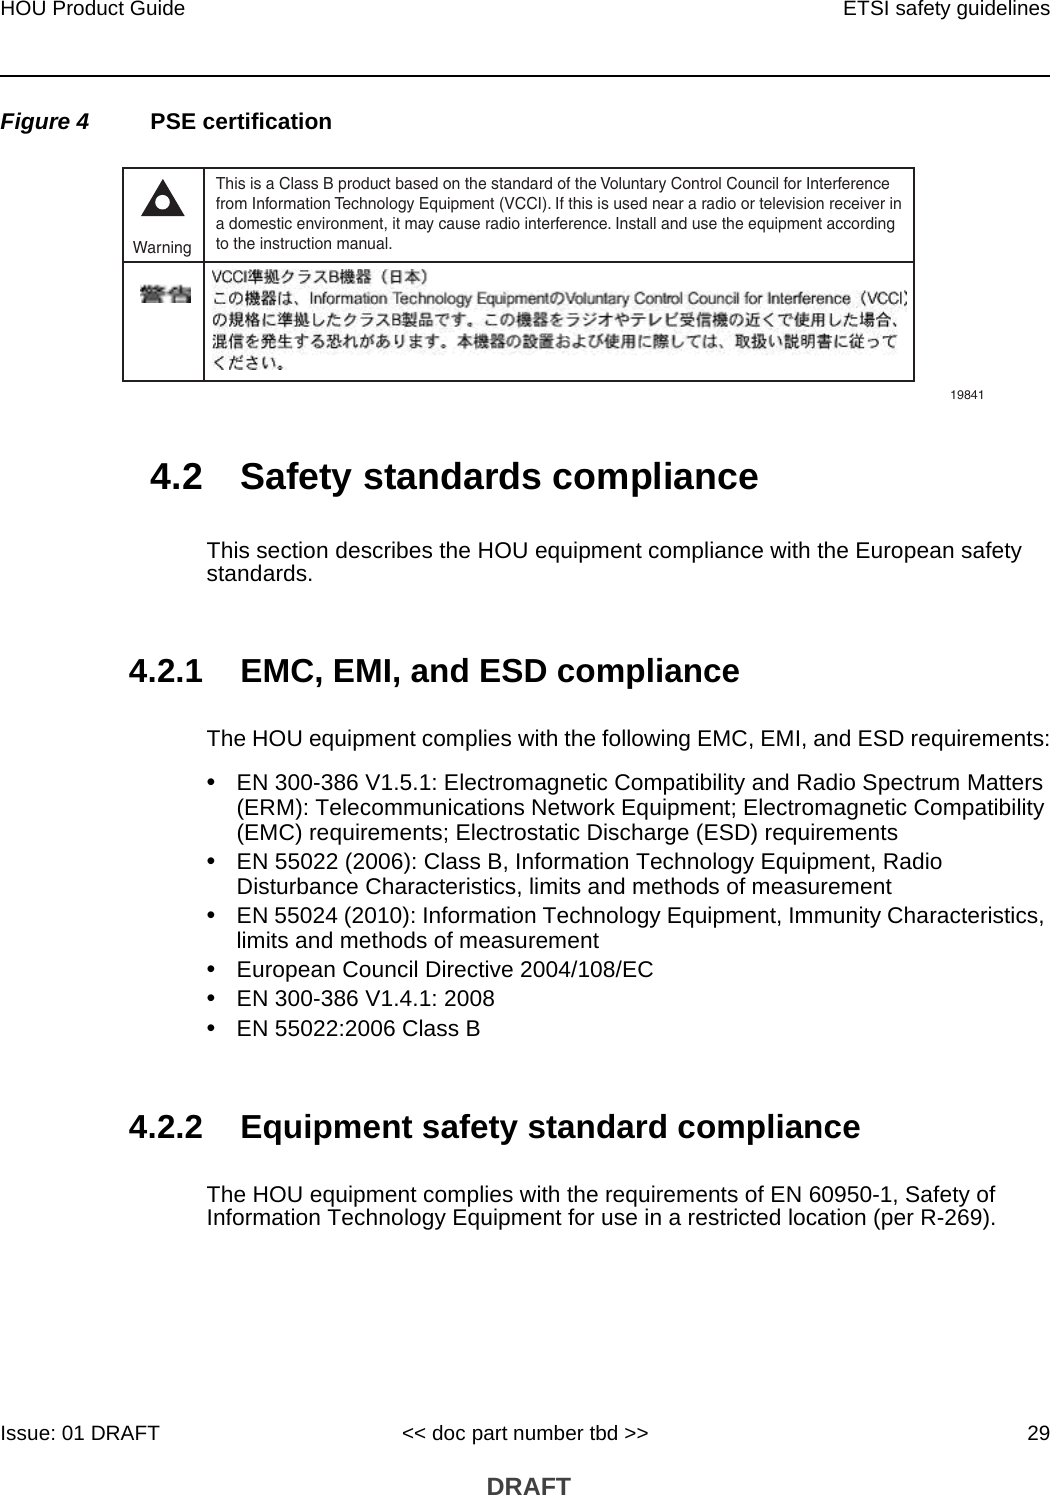 HOU Product Guide ETSI safety guidelinesIssue: 01 DRAFT &lt;&lt; doc part number tbd &gt;&gt; 29 DRAFTFigure 4 PSE certification4.2 Safety standards complianceThis section describes the HOU equipment compliance with the European safety standards.4.2.1 EMC, EMI, and ESD complianceThe HOU equipment complies with the following EMC, EMI, and ESD requirements:•EN 300-386 V1.5.1: Electromagnetic Compatibility and Radio Spectrum Matters (ERM): Telecommunications Network Equipment; Electromagnetic Compatibility (EMC) requirements; Electrostatic Discharge (ESD) requirements•EN 55022 (2006): Class B, Information Technology Equipment, Radio Disturbance Characteristics, limits and methods of measurement•EN 55024 (2010): Information Technology Equipment, Immunity Characteristics, limits and methods of measurement•European Council Directive 2004/108/EC•EN 300-386 V1.4.1: 2008•EN 55022:2006 Class B4.2.2 Equipment safety standard complianceThe HOU equipment complies with the requirements of EN 60950-1, Safety of Information Technology Equipment for use in a restricted location (per R-269).This is a Class B product based on the standard of the Voluntary Control Council for Interferencefrom Information Technology Equipment (VCCI). If this is used near a radio or television receiver ina domestic environment, it may cause radio interference. Install and use the equipment accordingto the instruction manual. Warning19841